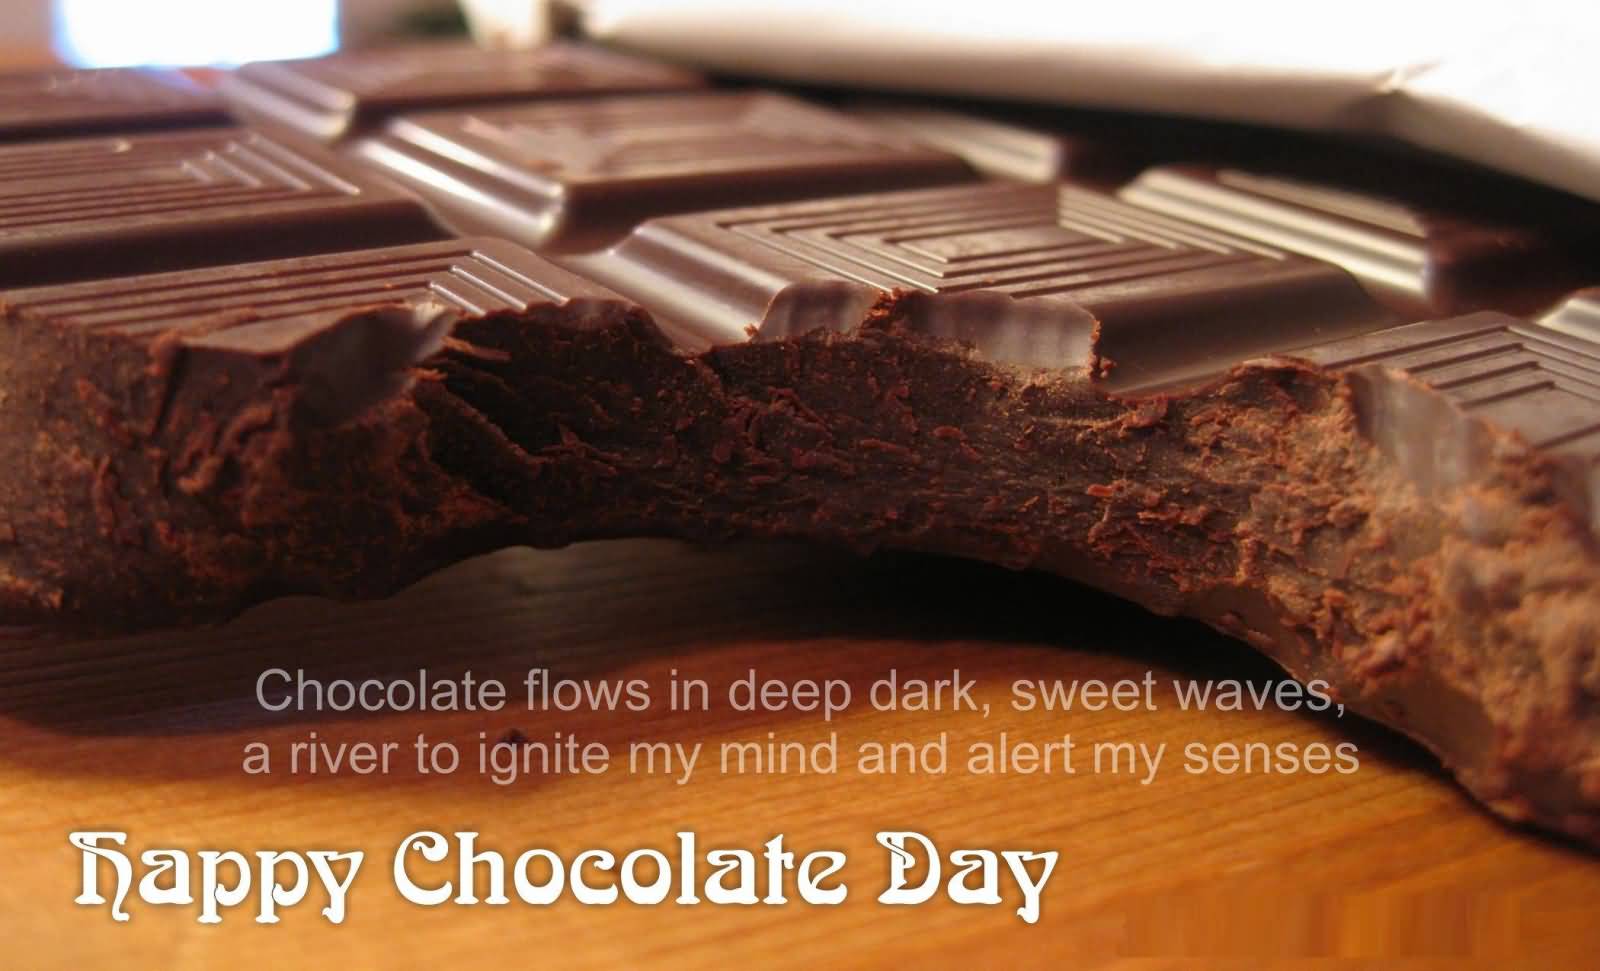 Chocolate Flows In Deep Dark, Sweet Waves, A River To Ignite My Mind And Alert My Senses Happy Chocolate Day